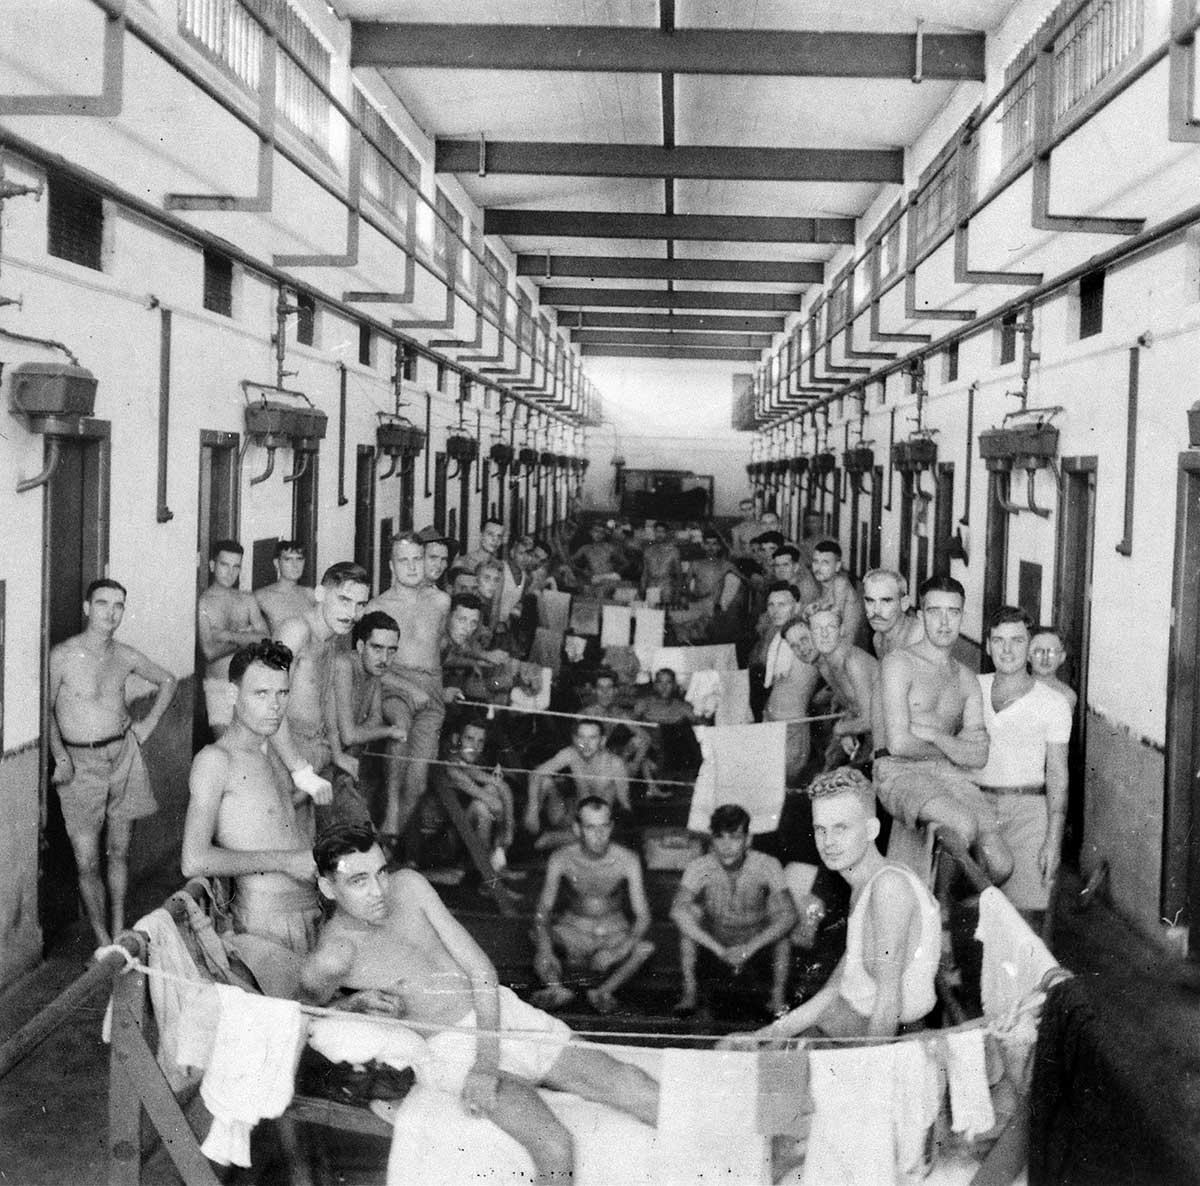 Black and white photograph of half-dressed men gathered in the hallway of a prison.